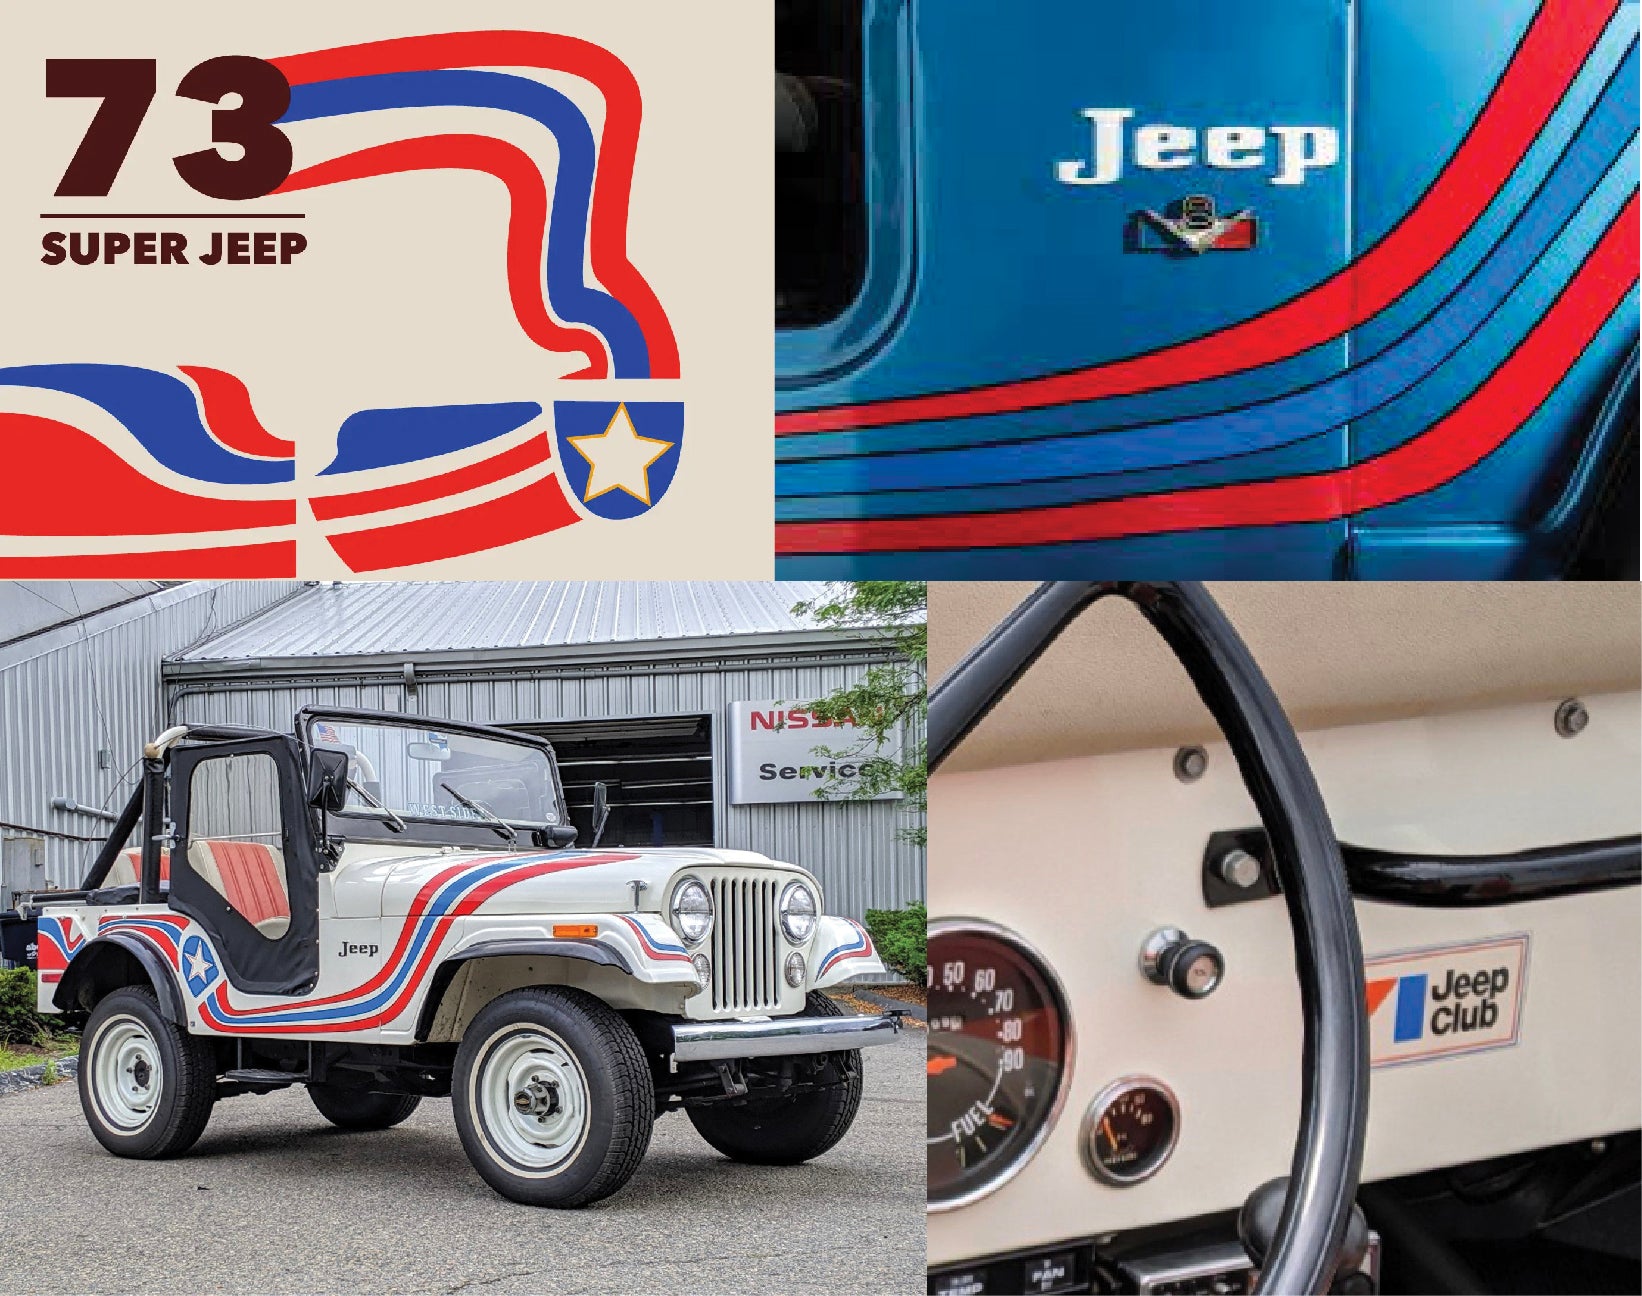 73 Super Jeep, inspiration for R.Riveter x Jeep collection